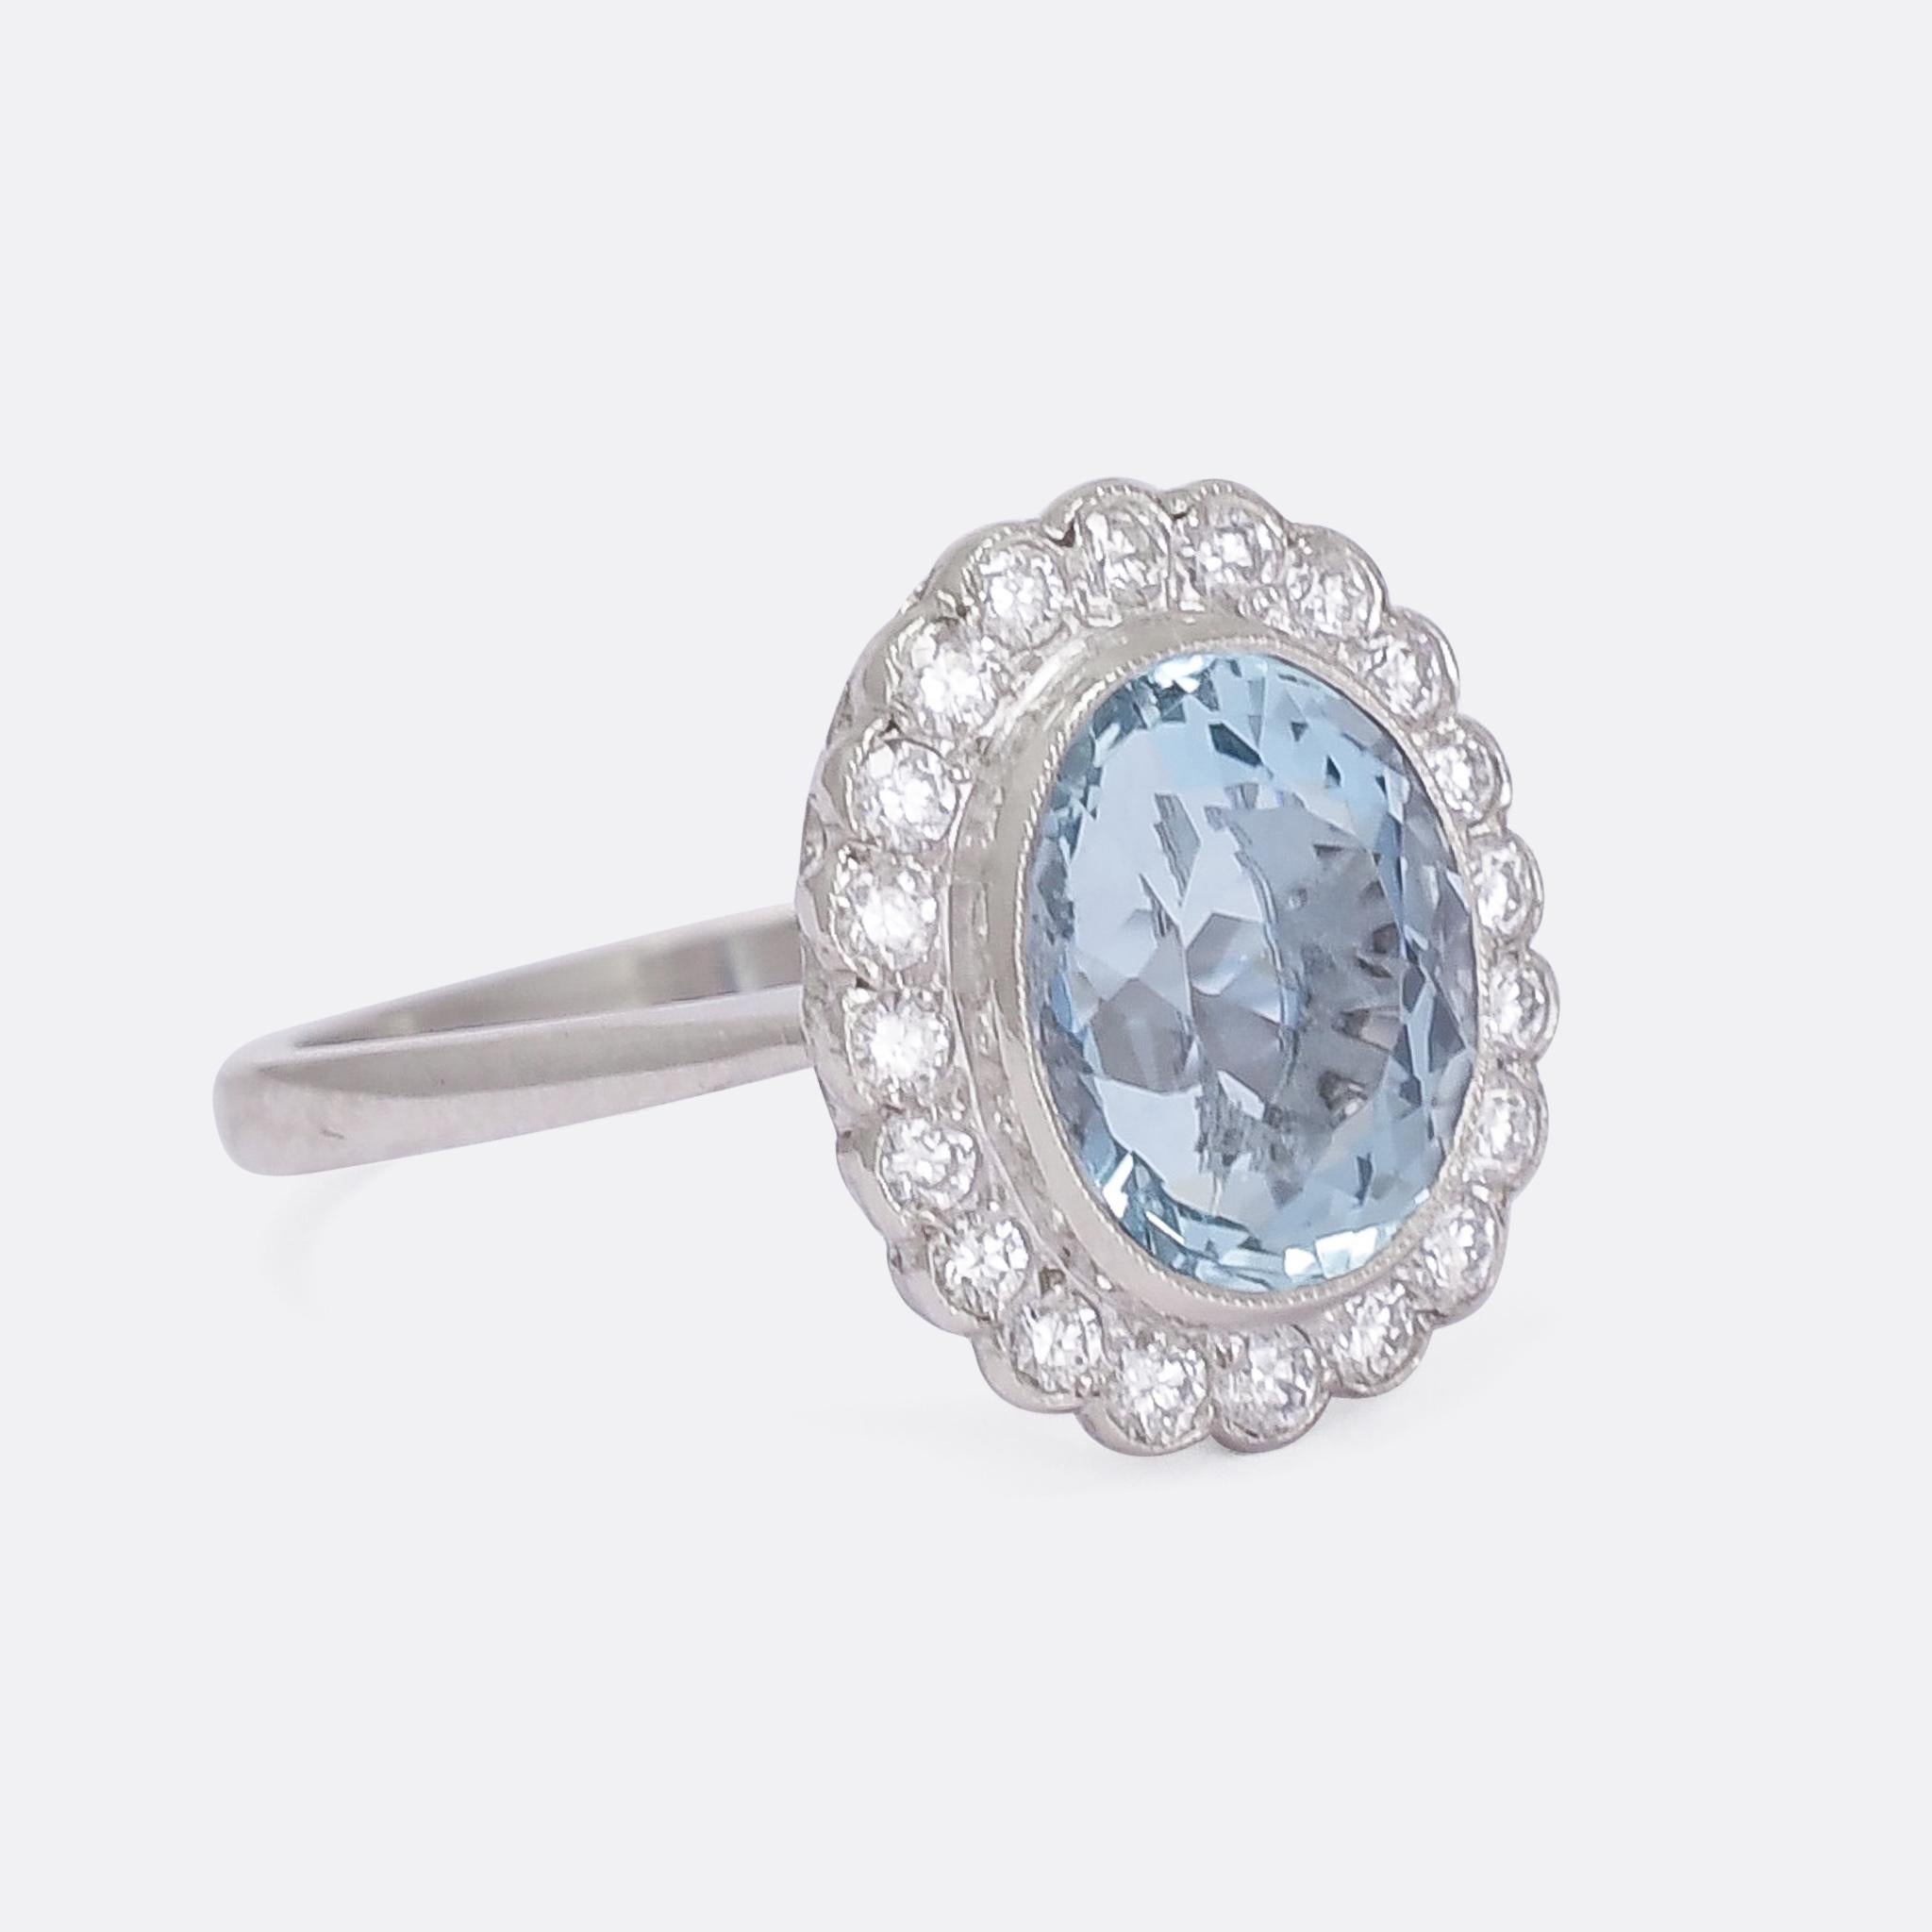 A stunning Art Deco period aquamarine and diamond flower cluster ring dating from the 1920s. Modelled in platinum throughout, it features millegrain bezel settings and gorgeous openwork behind the head allowing lots of light in behind the stones.